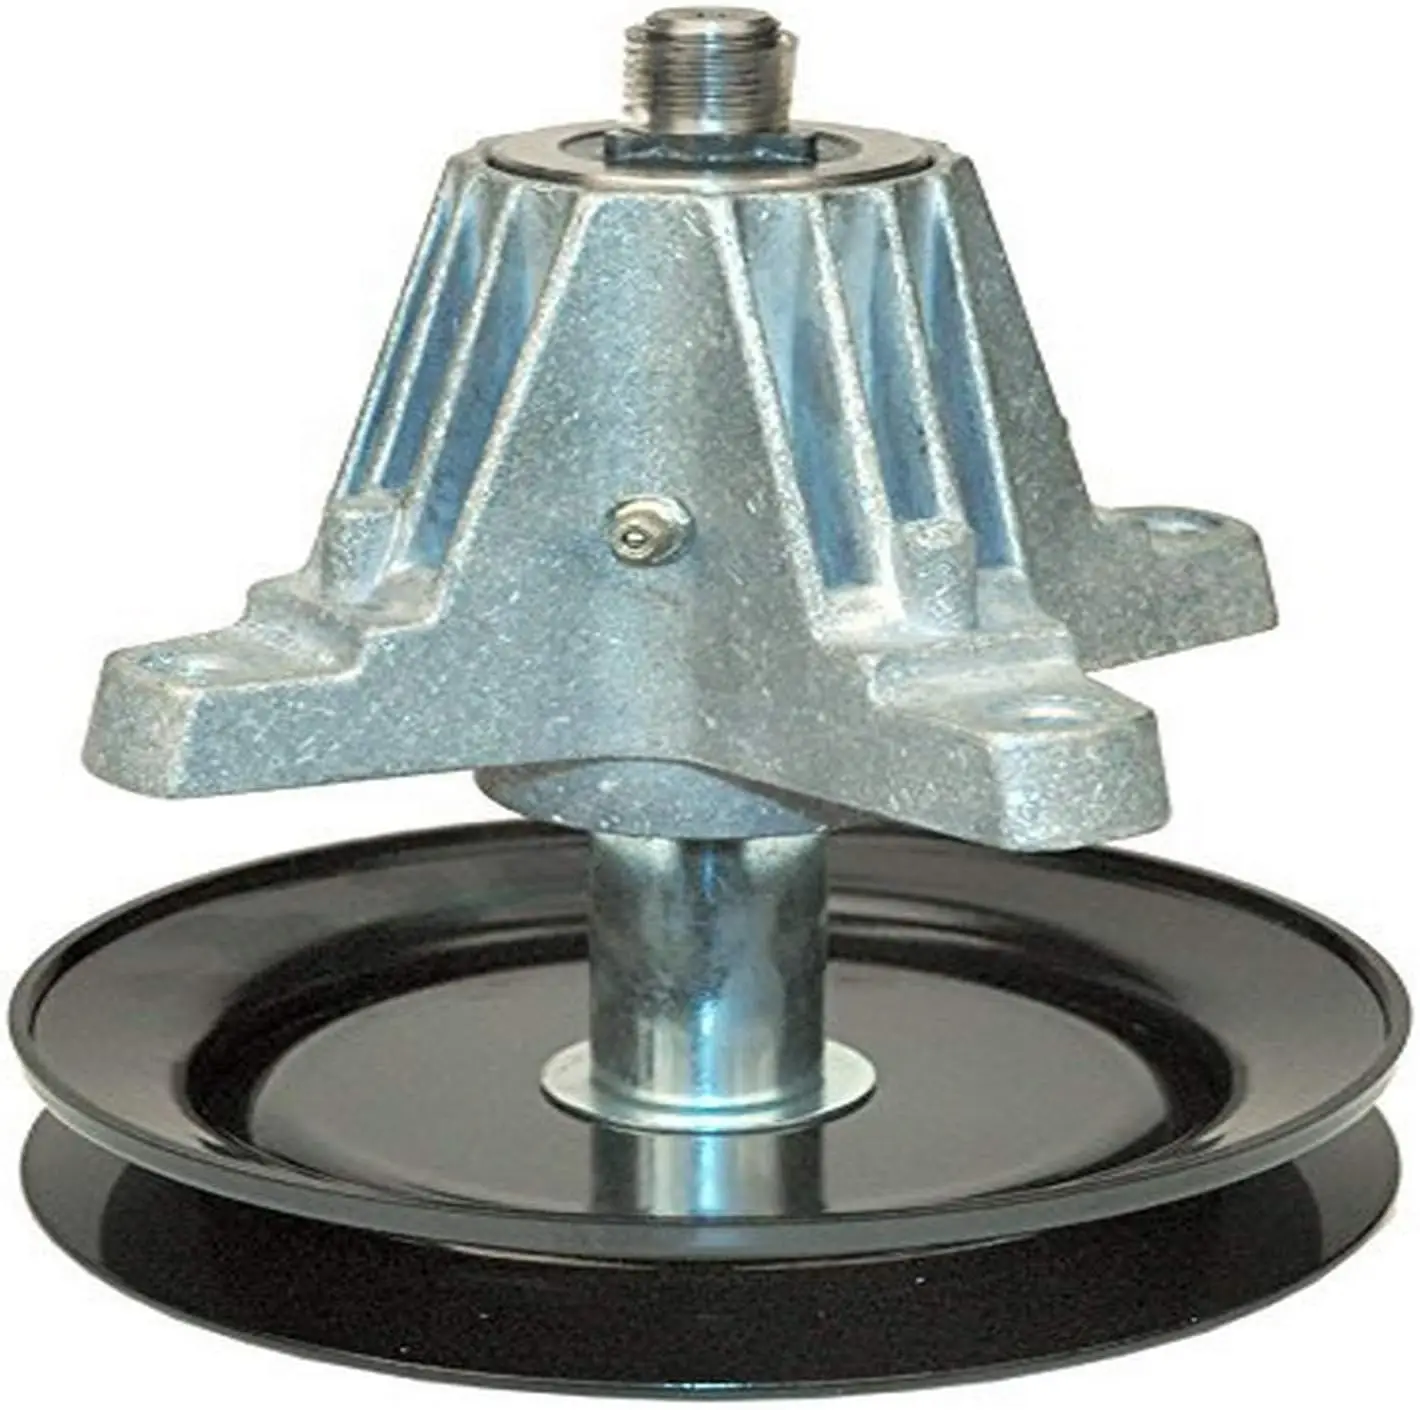 

Spindle Assembly for MTD, Cub Cadet Mowers s, 918-04822A, 918-04889A, 918-04889B, Replaces OEM Numbers 618-04822A, 618-04950, 91